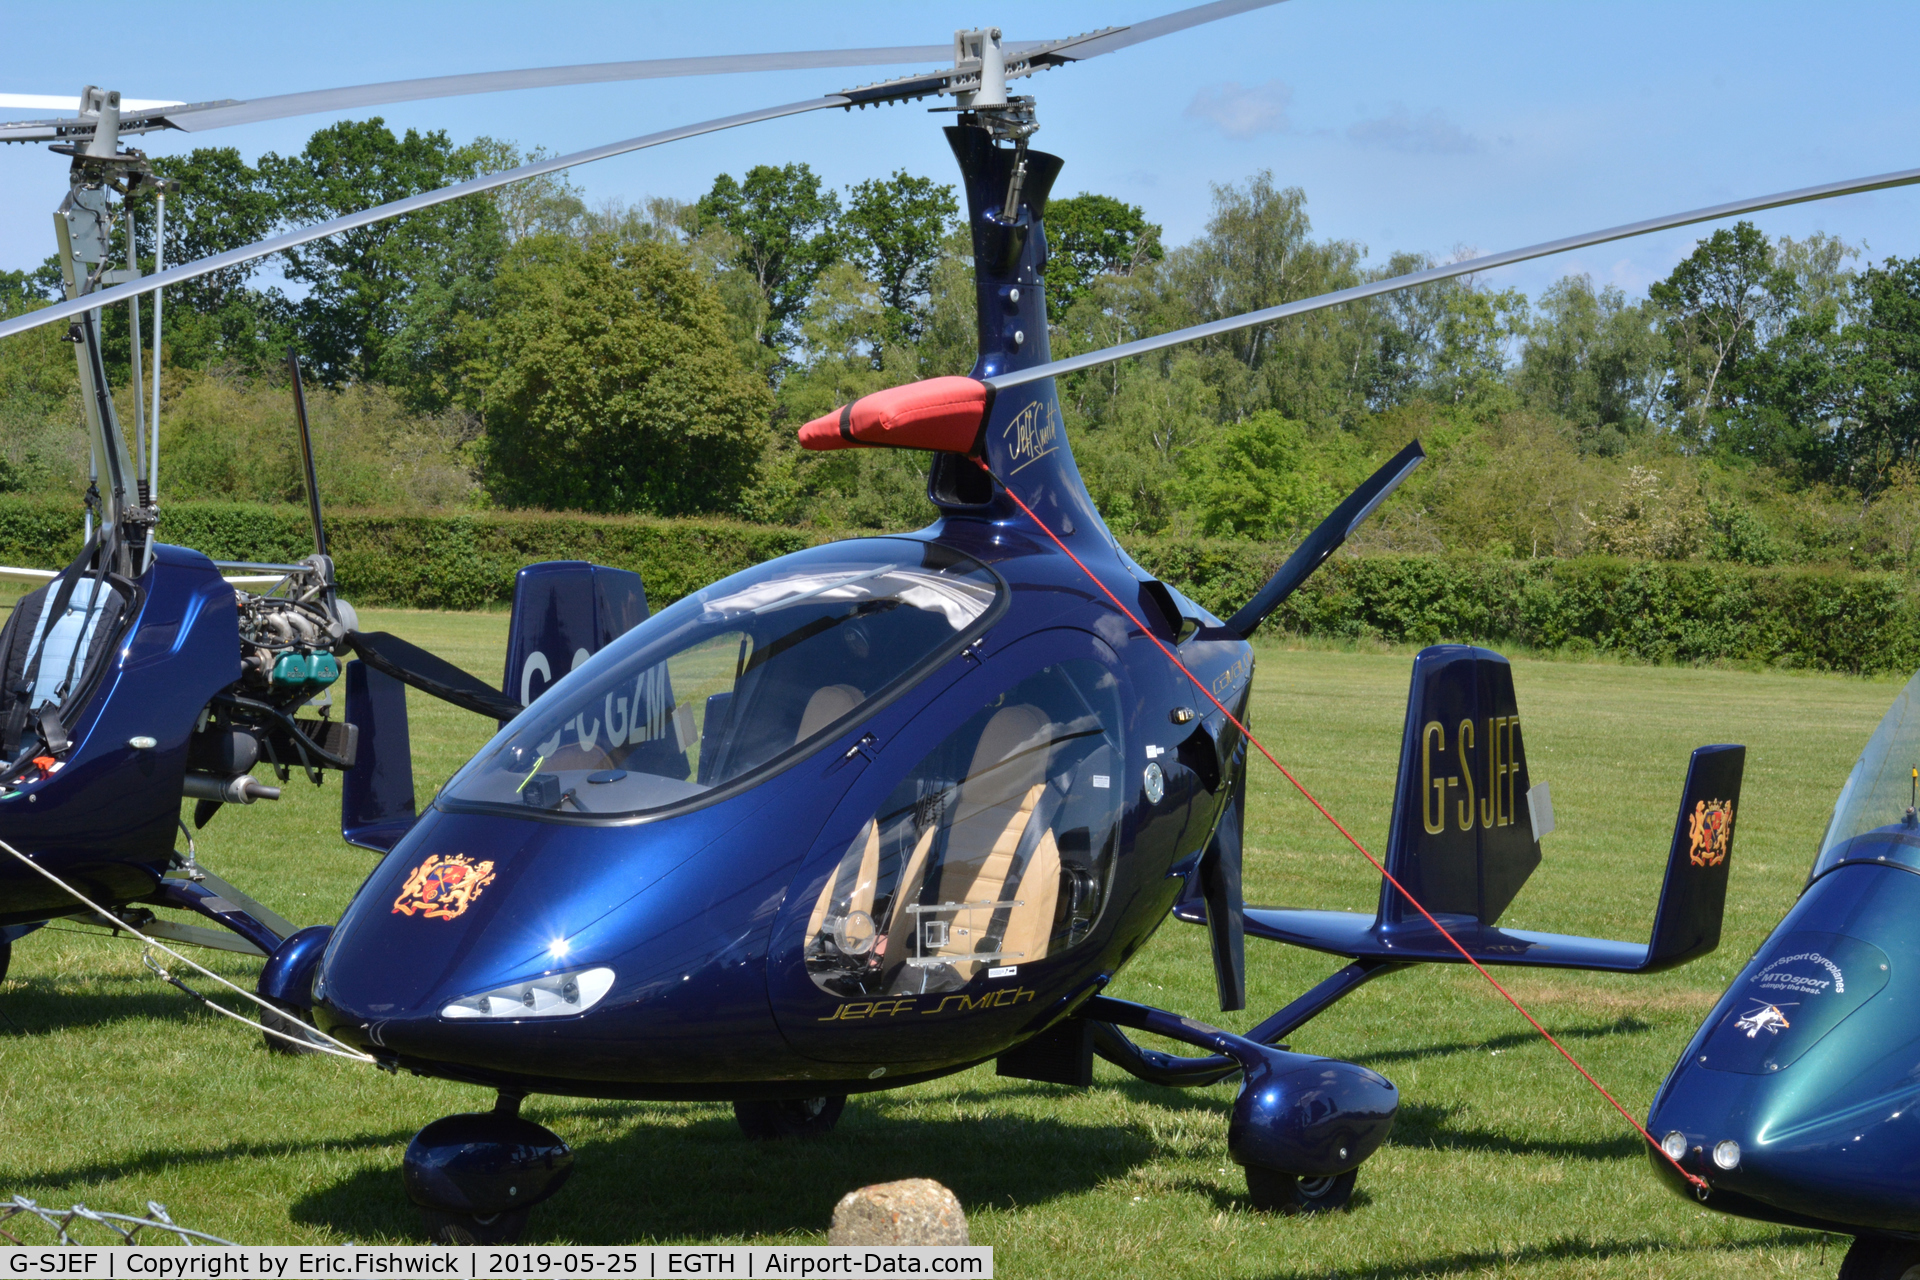 G-SJEF, 2015 Rotorsport UK Cavalon C/N RSUK/CVLN/016, 3. G-SJEF at the British Rotor Association annual gathering at the Shuttleworth Collection, May. 2019.